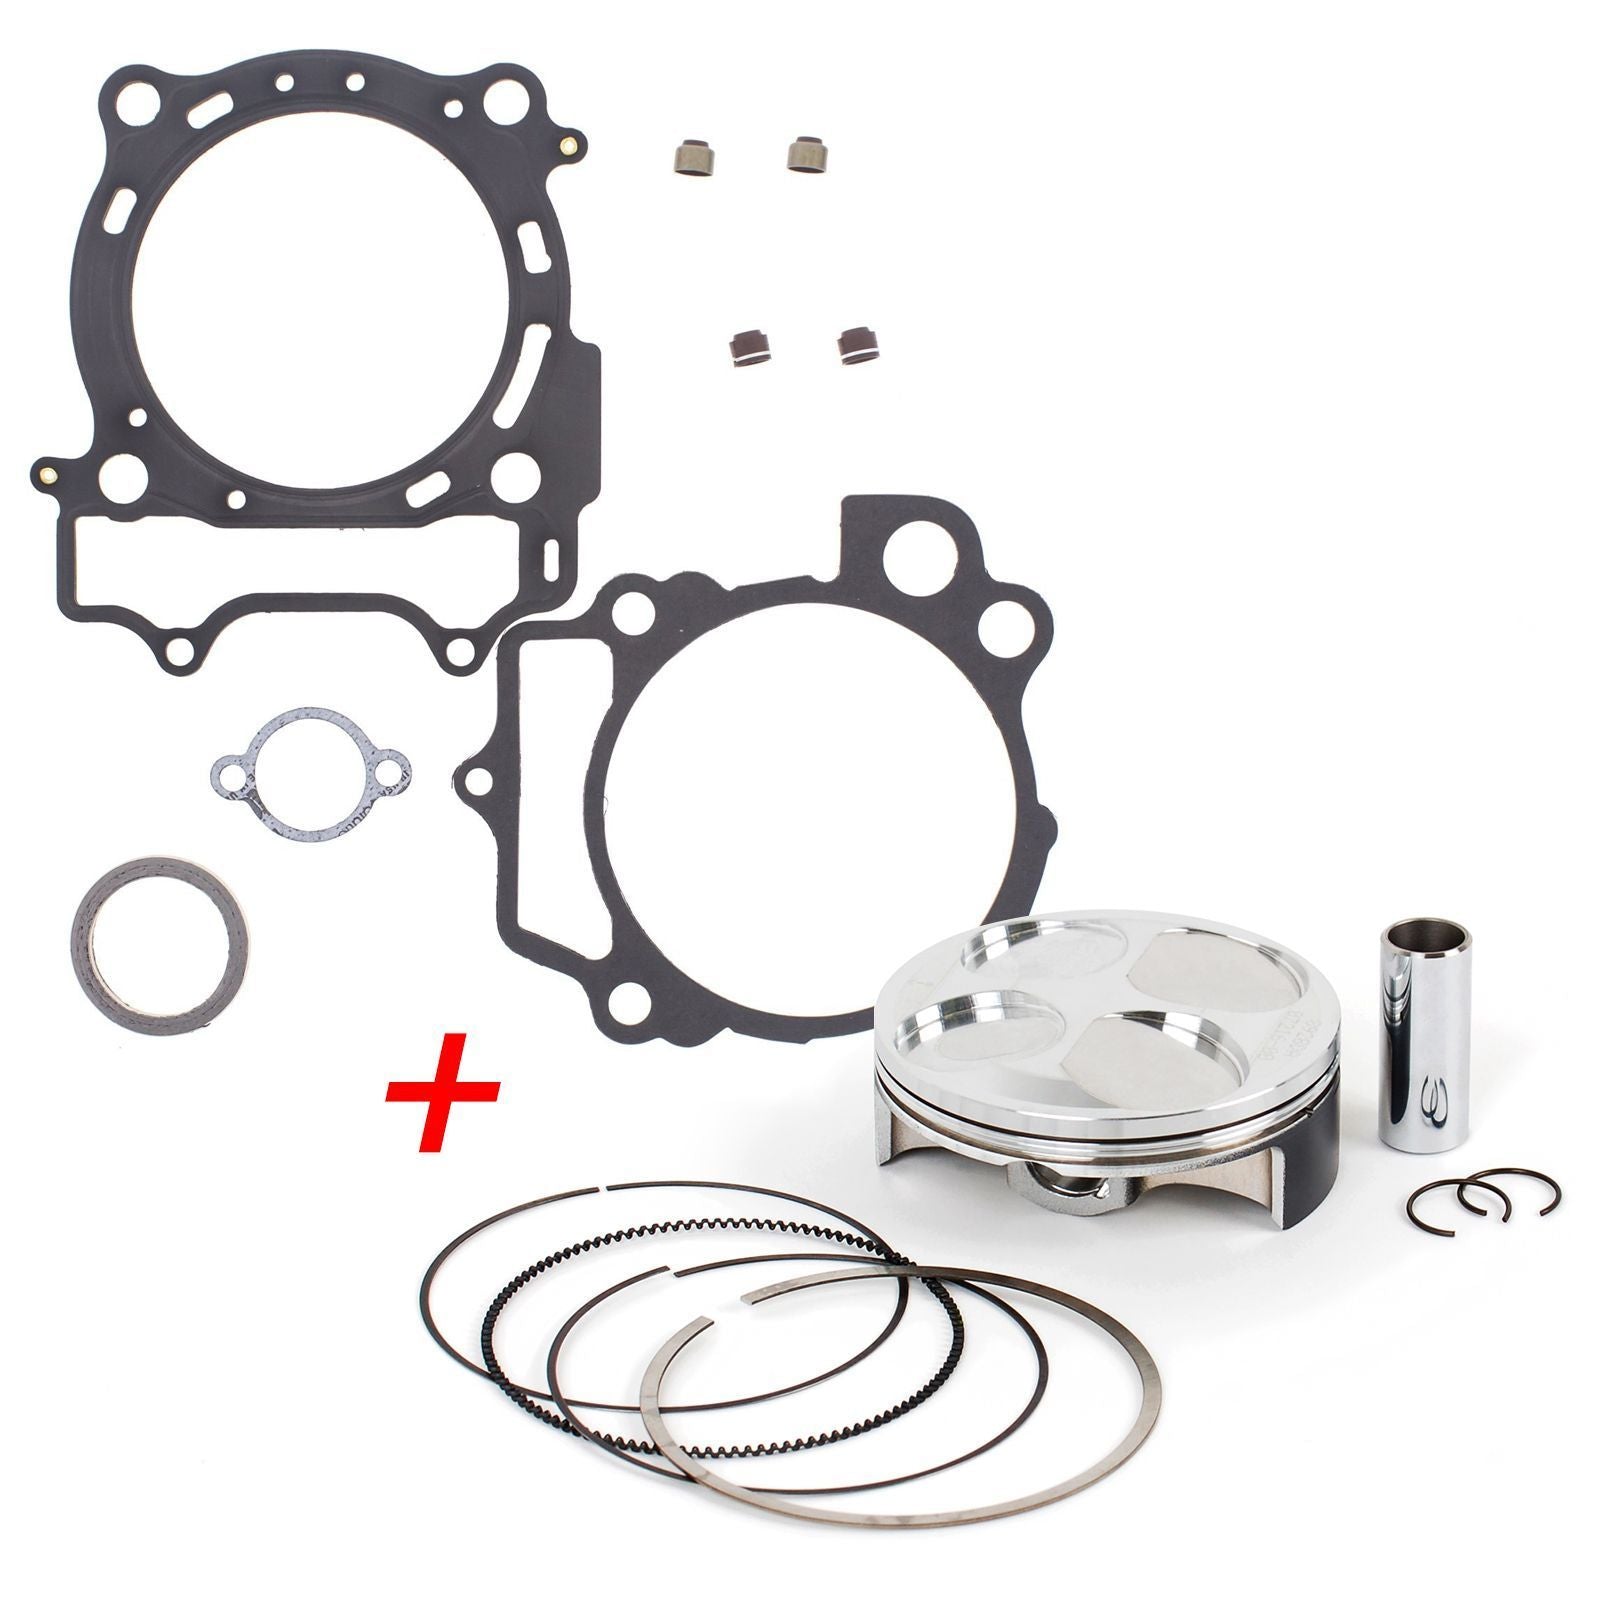 New Top End Rebuild Kit (B) For Yamaha WR450F 2016-2019 #ERTY035B